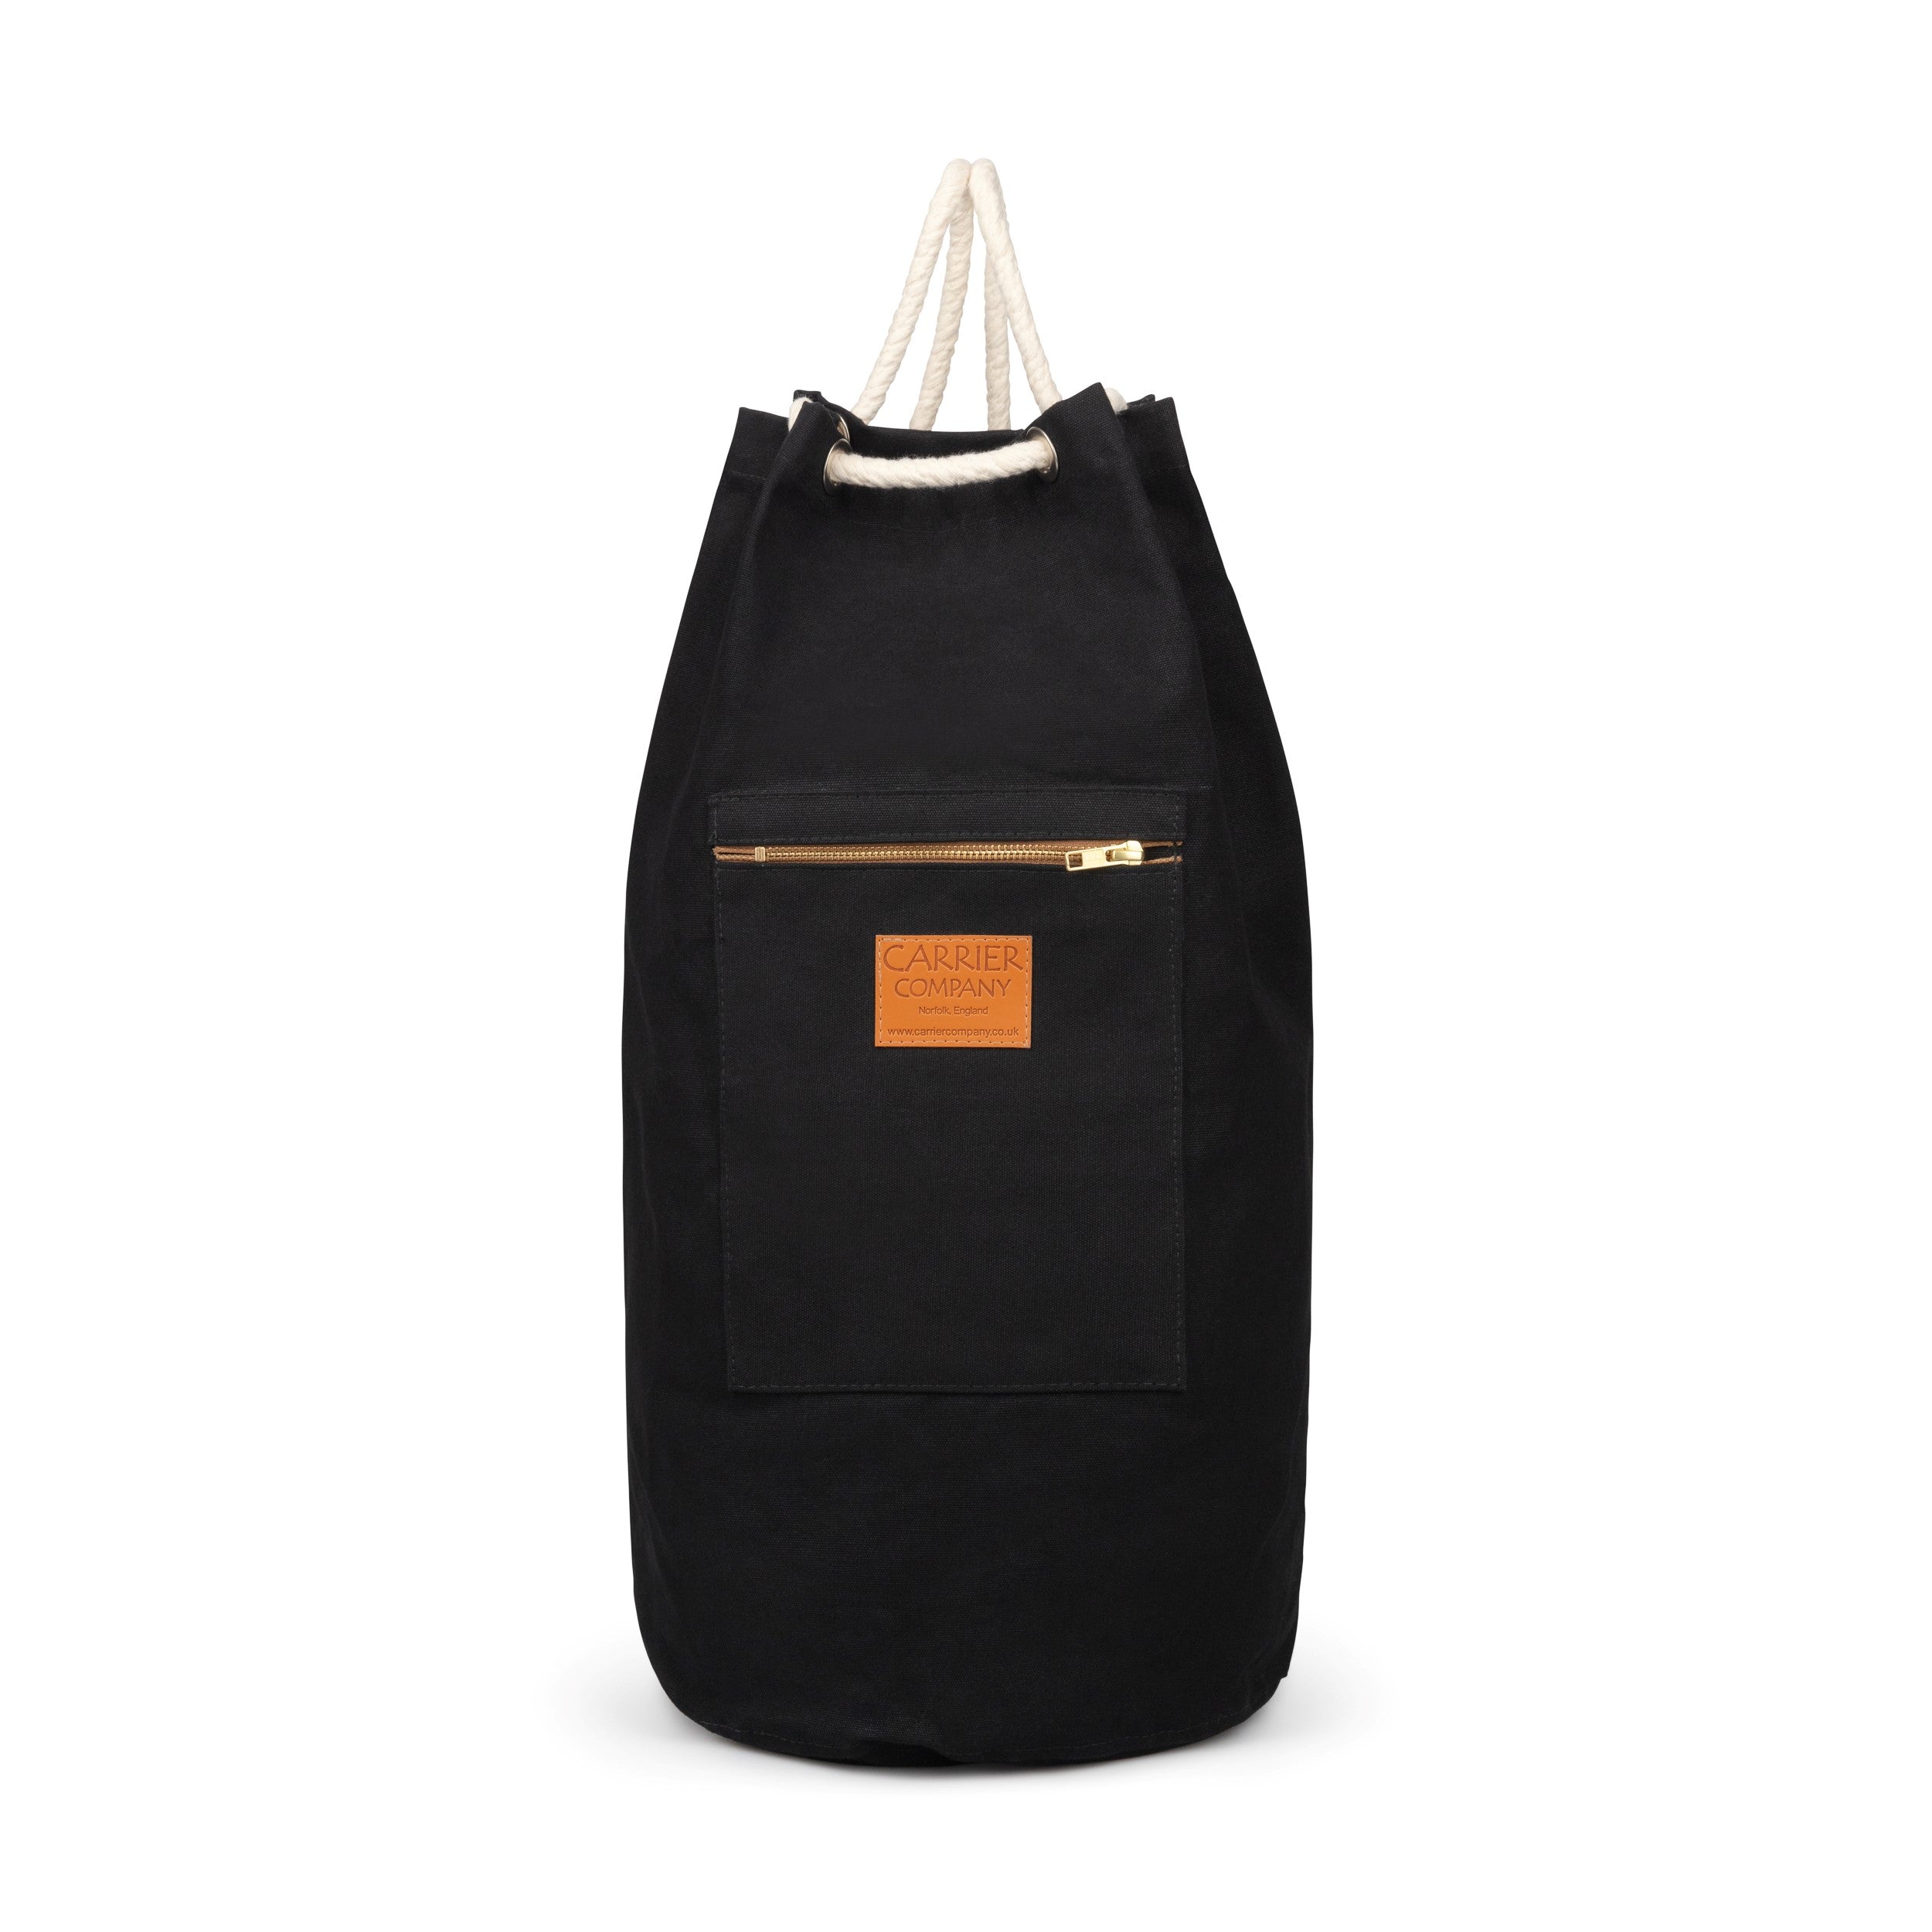 Carrier Company Duffle Bag in Black